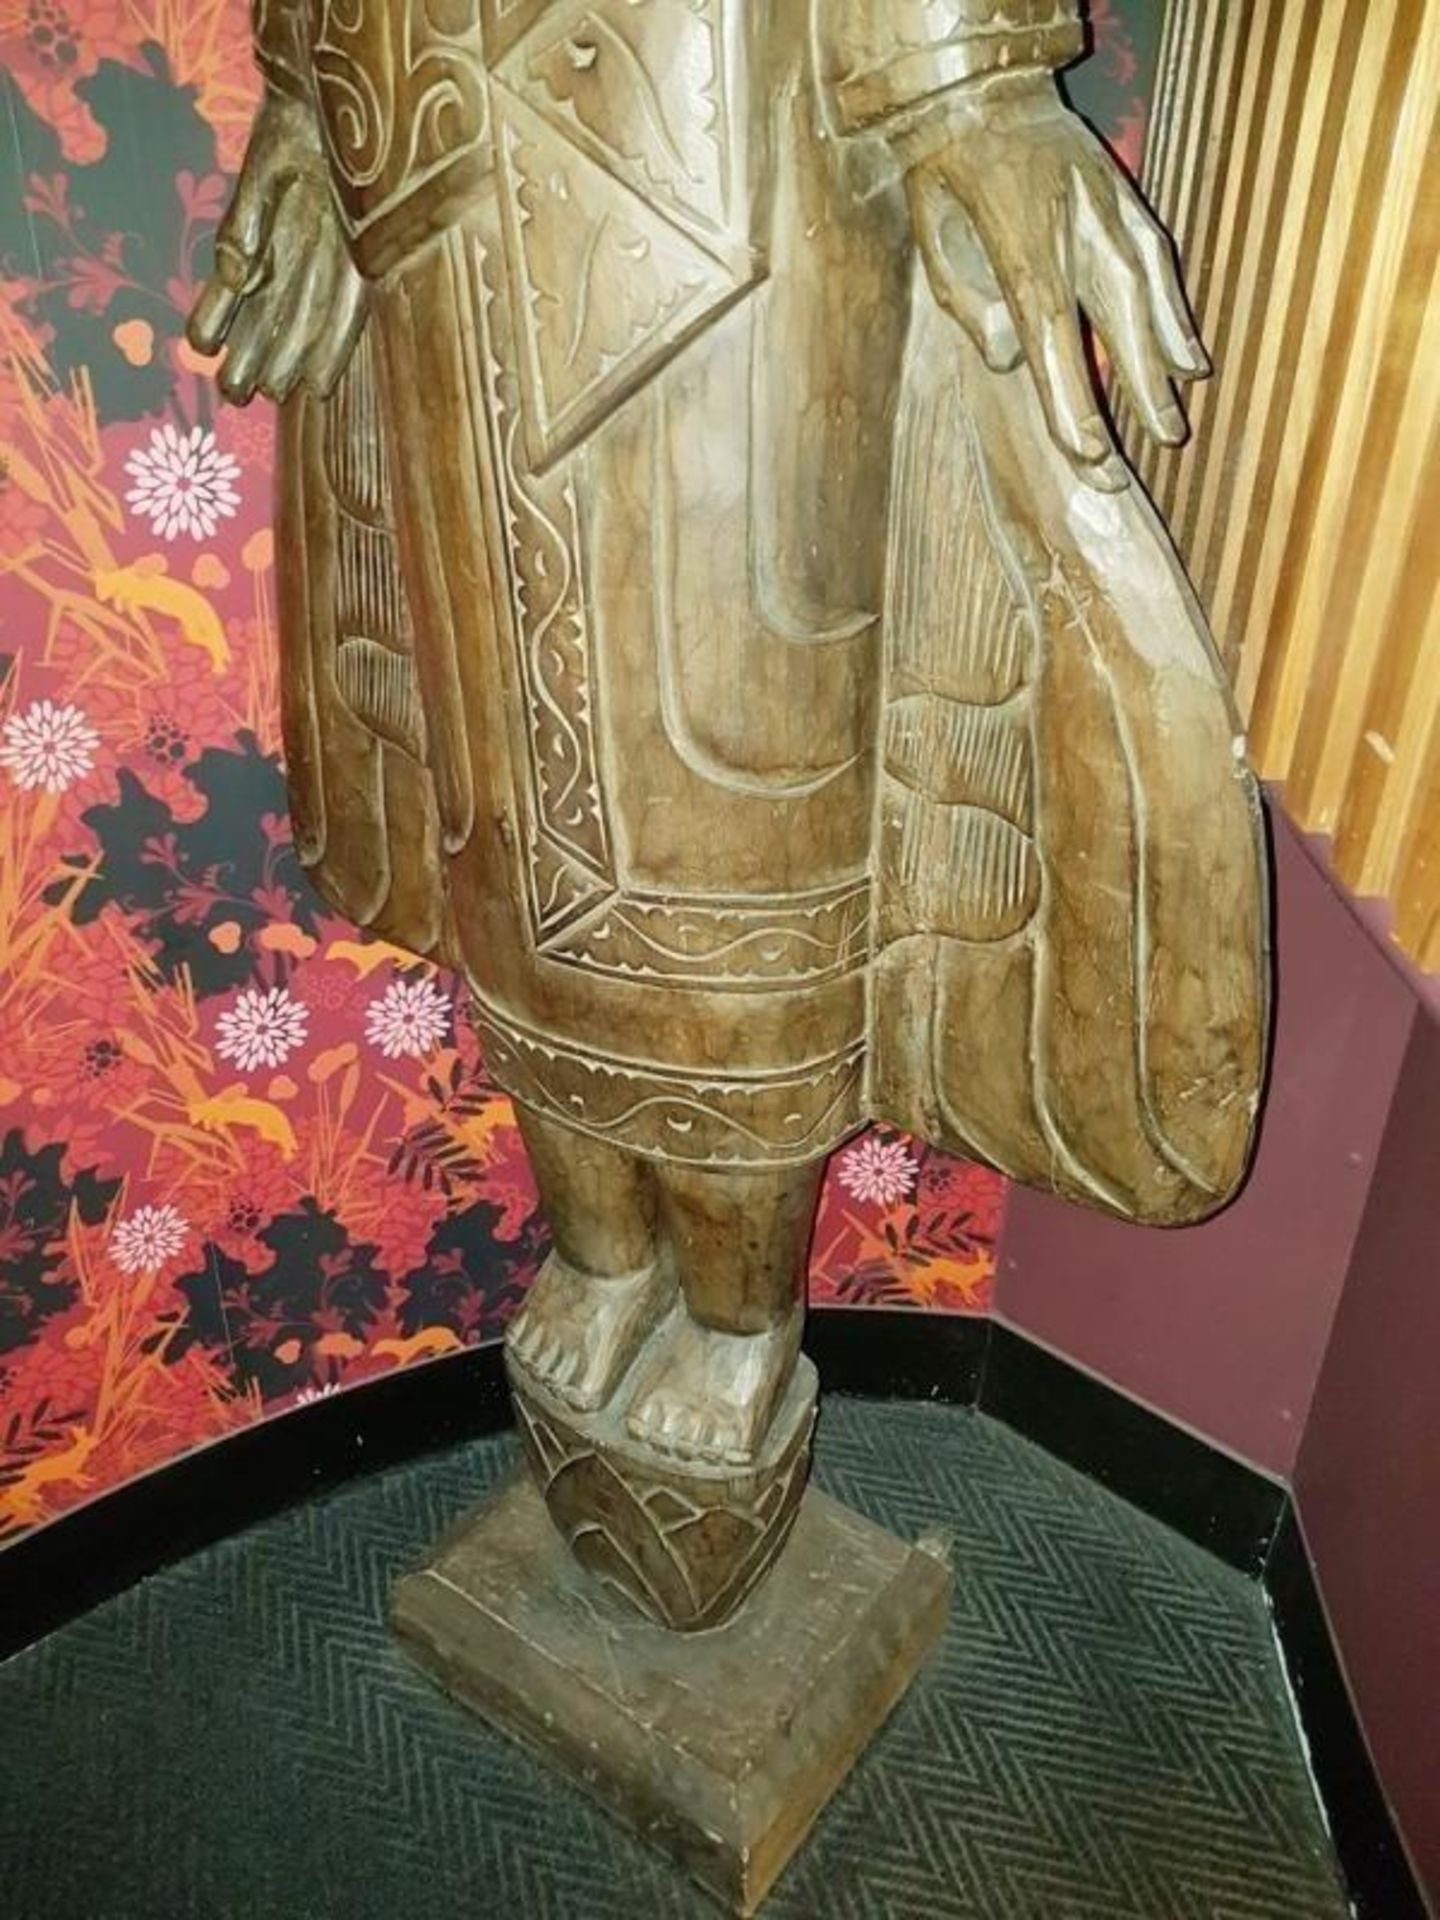 1 x Freestanding Buddha Statue - Over 8ft Tall - Natural Carved Wood Finish - H270 x W95 x D40 cms - - Image 6 of 8